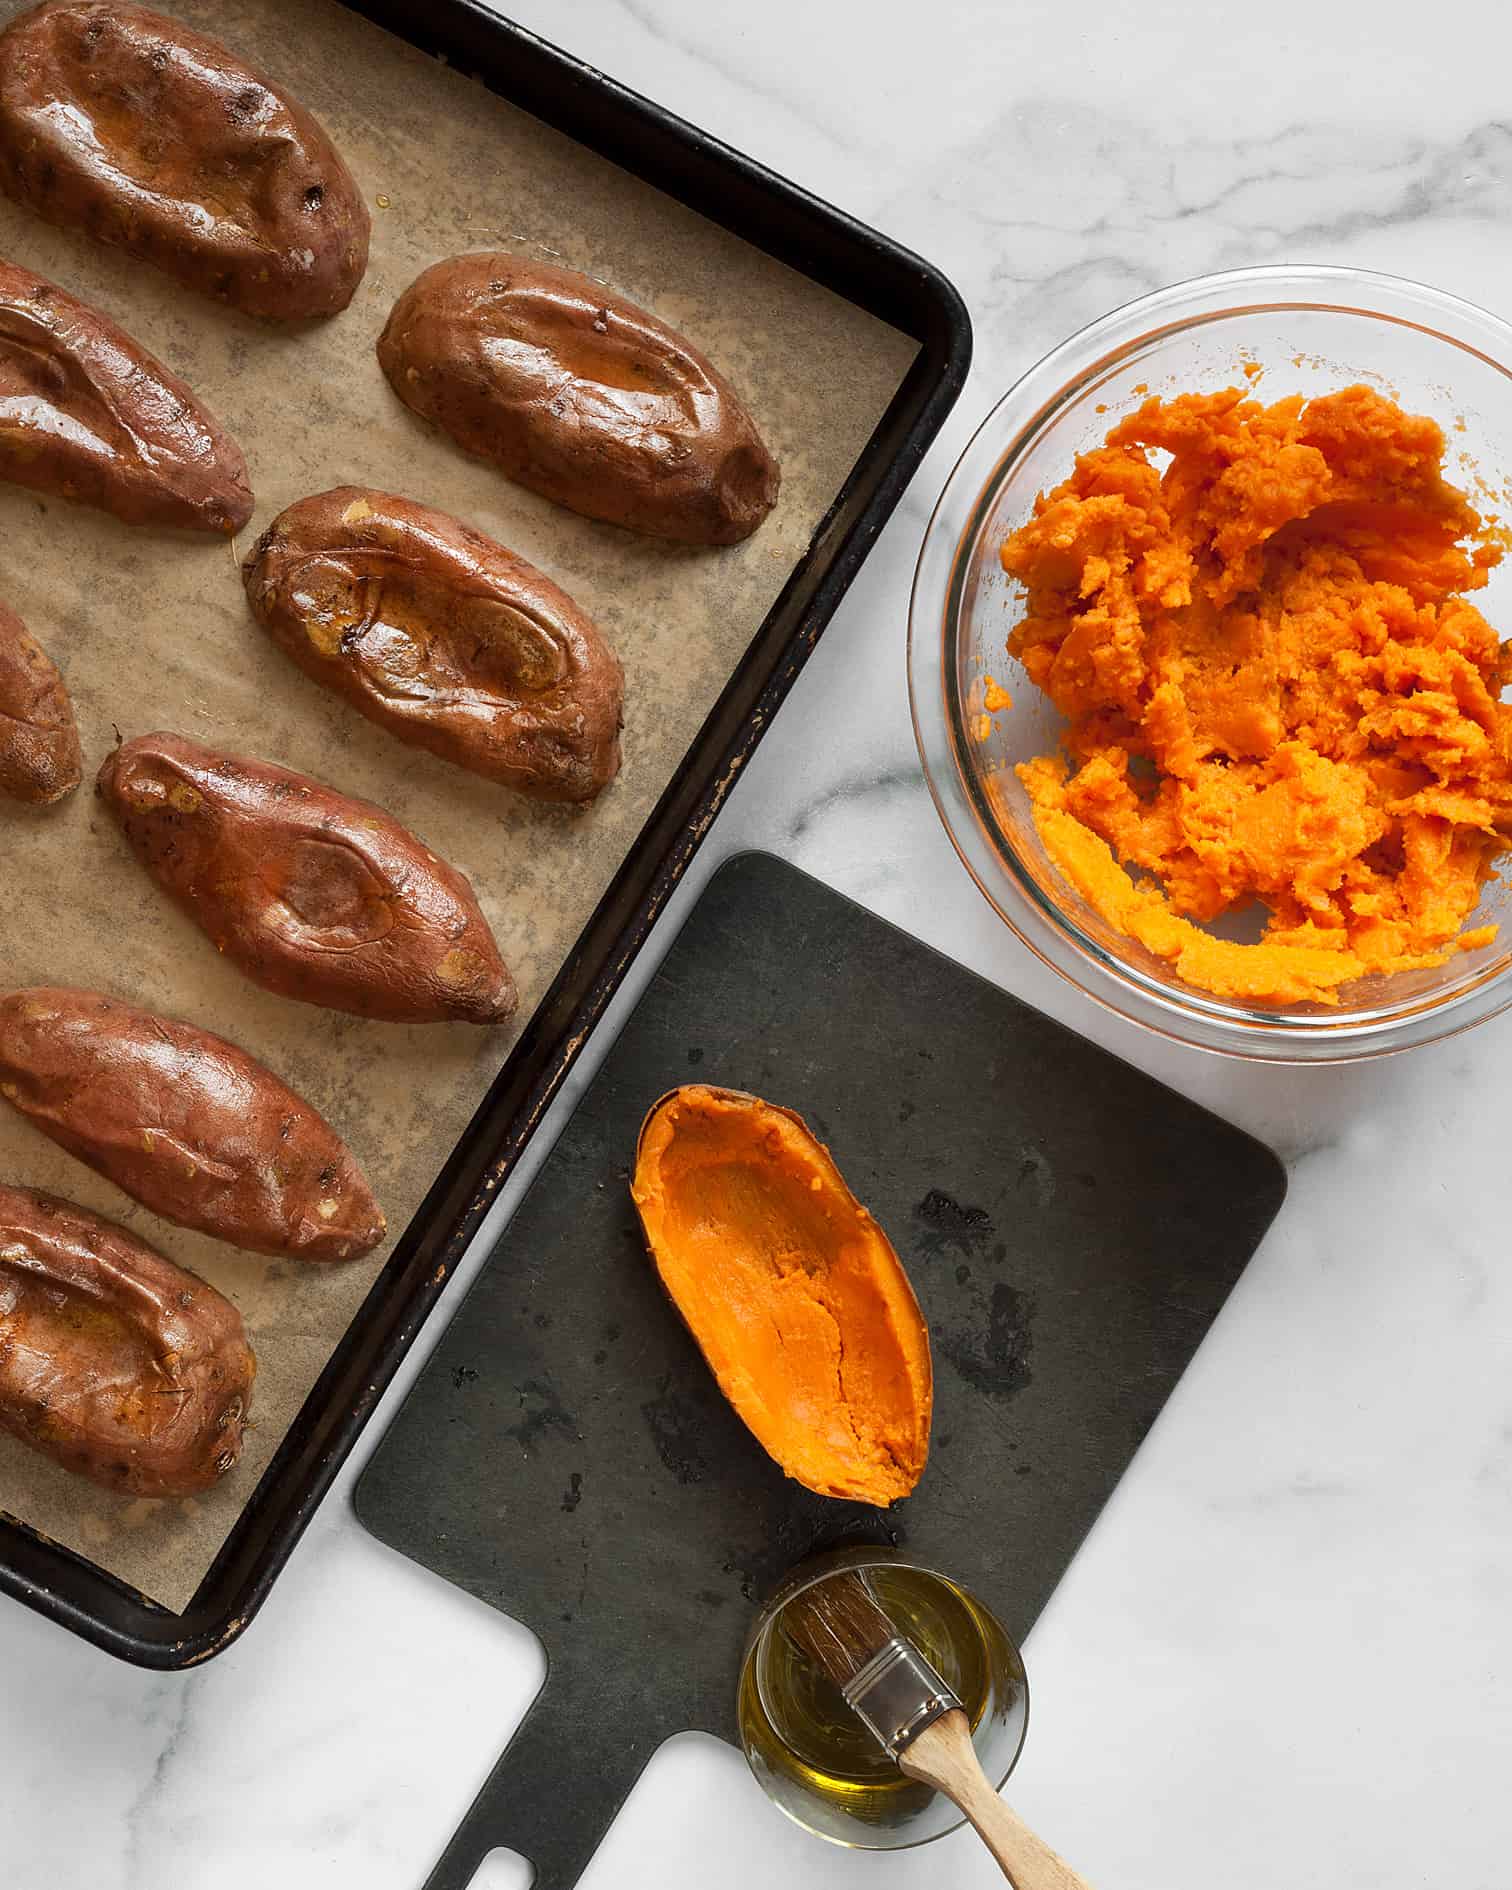 Scoop out the orange flesh and put teh sweet potatoes on a sheet pan cut side down